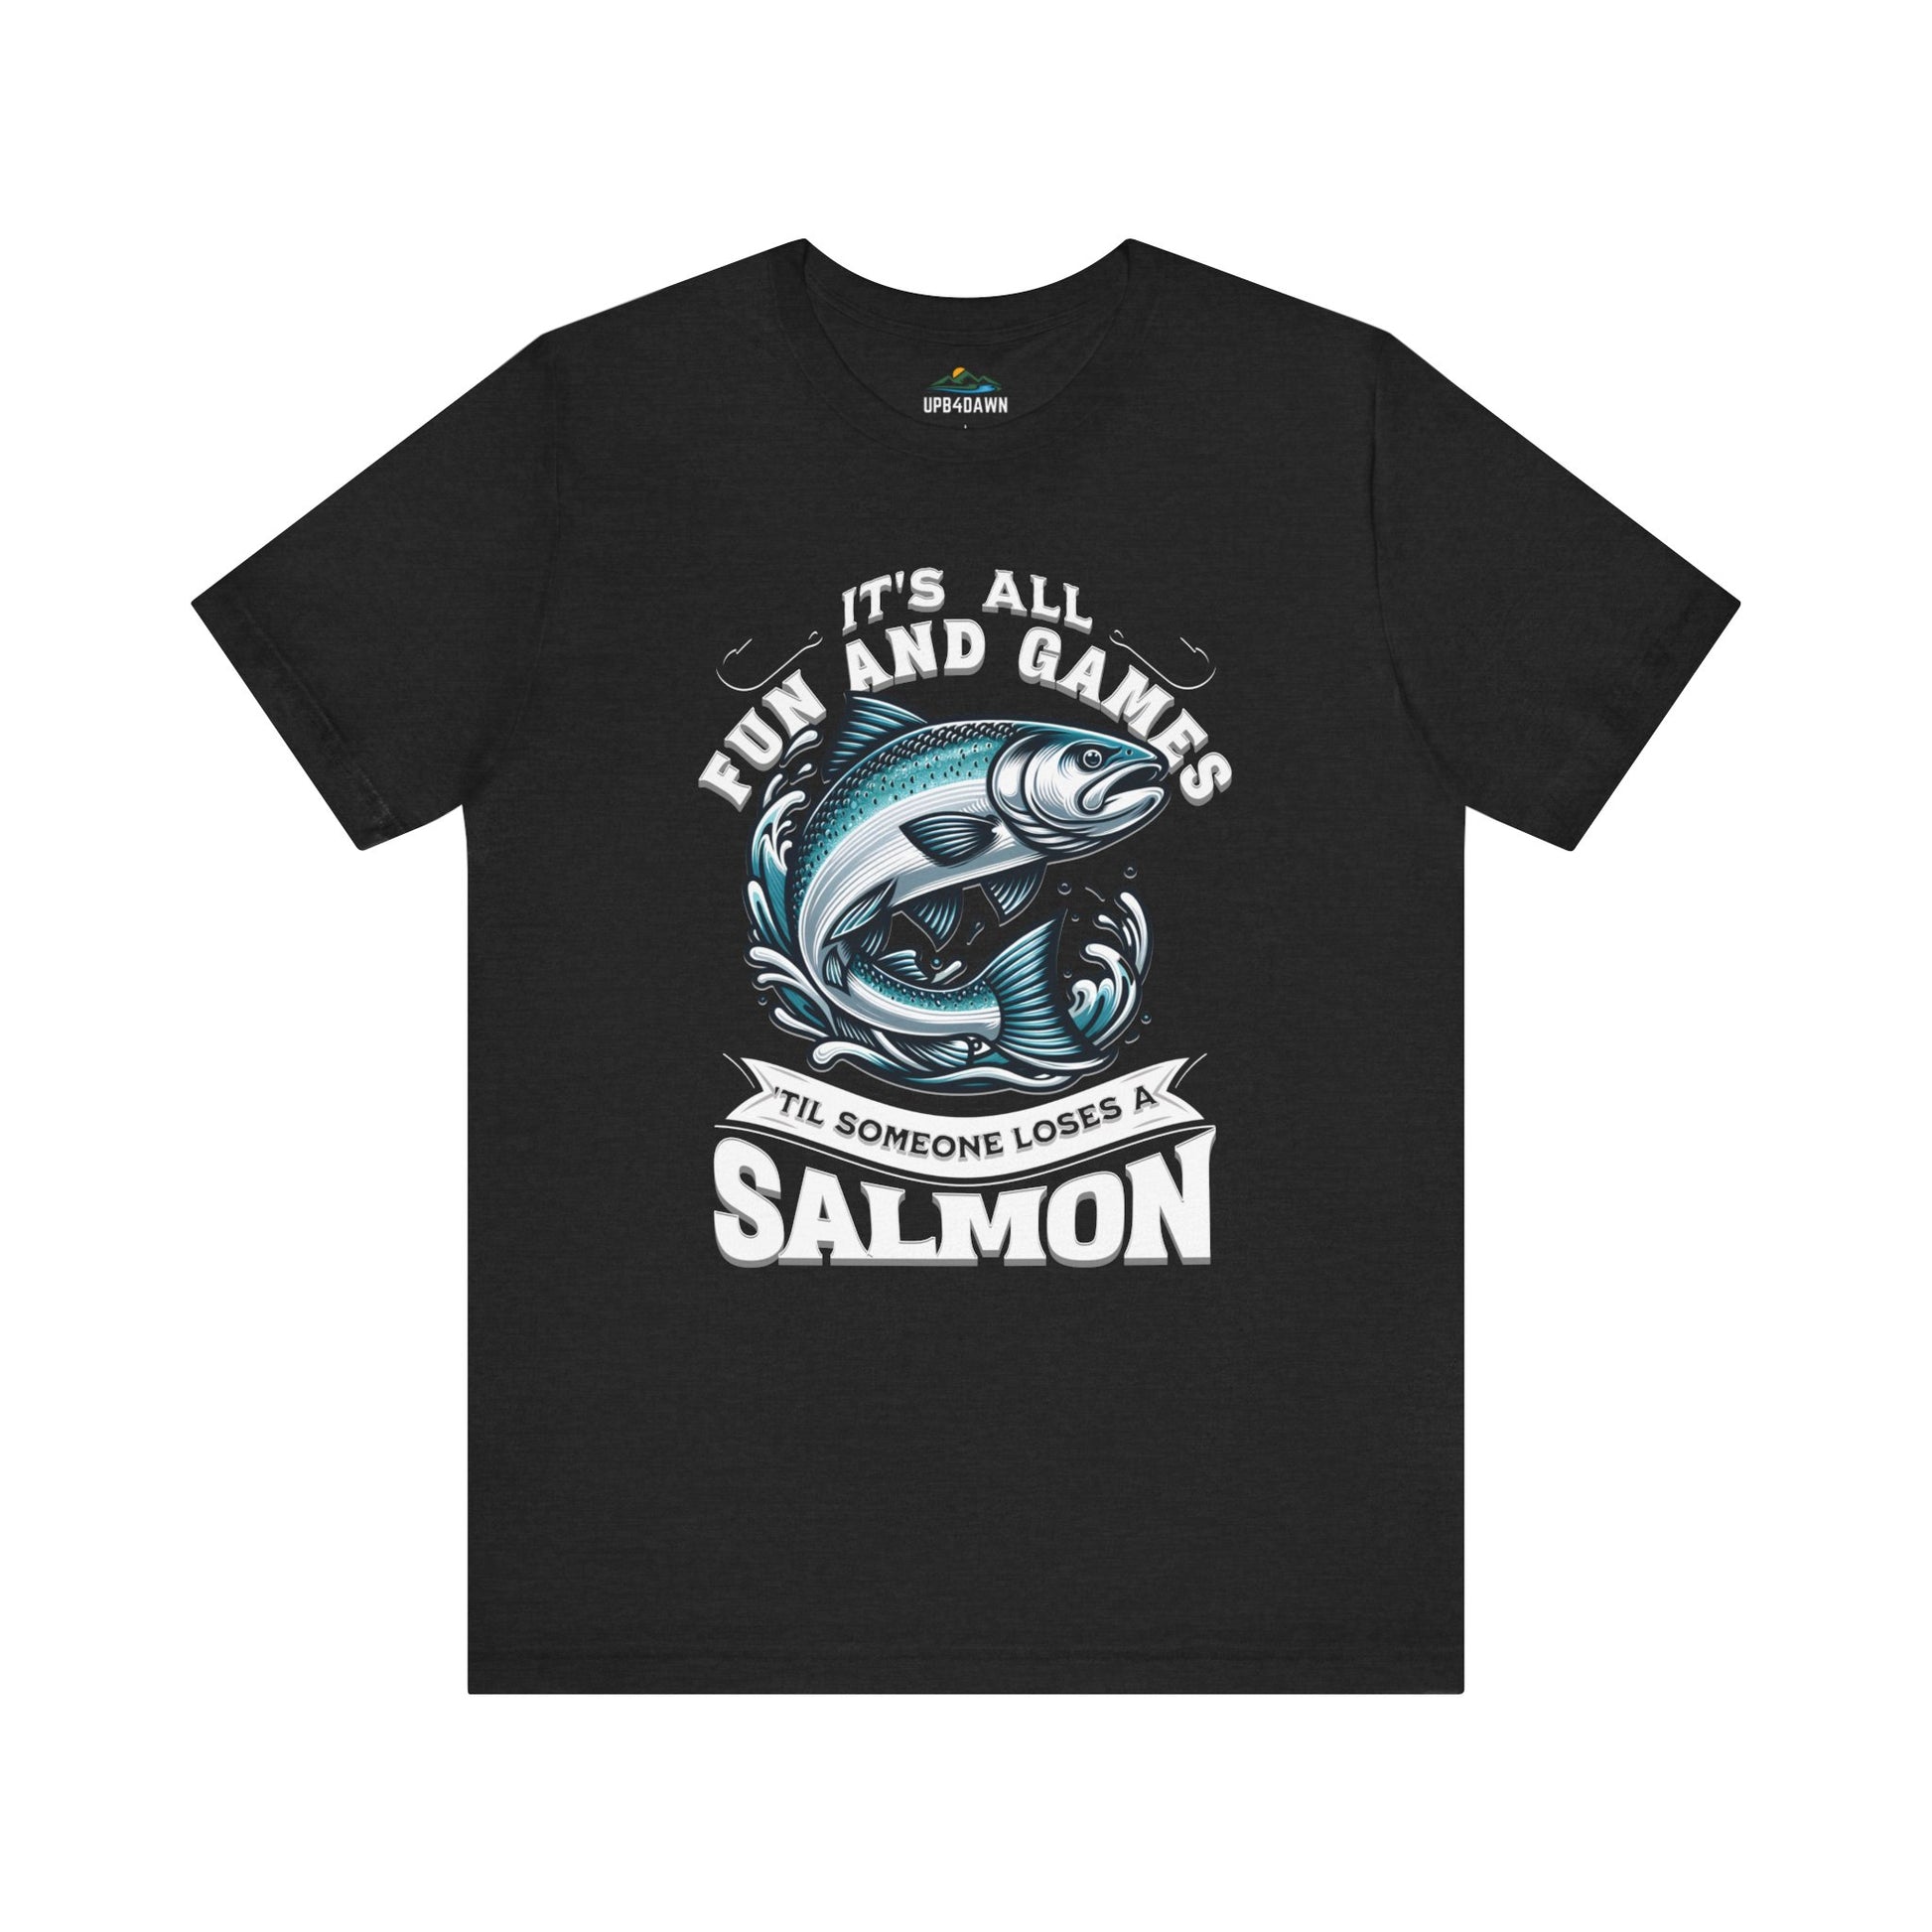 Navy blue "It's All Fun and Games Until Someone Loses a Salmon" t-shirt featuring a graphic with the phrase "it's all fun and games 'til someone loses a salmon" encircling an illustration of a large salmon leaping through water.